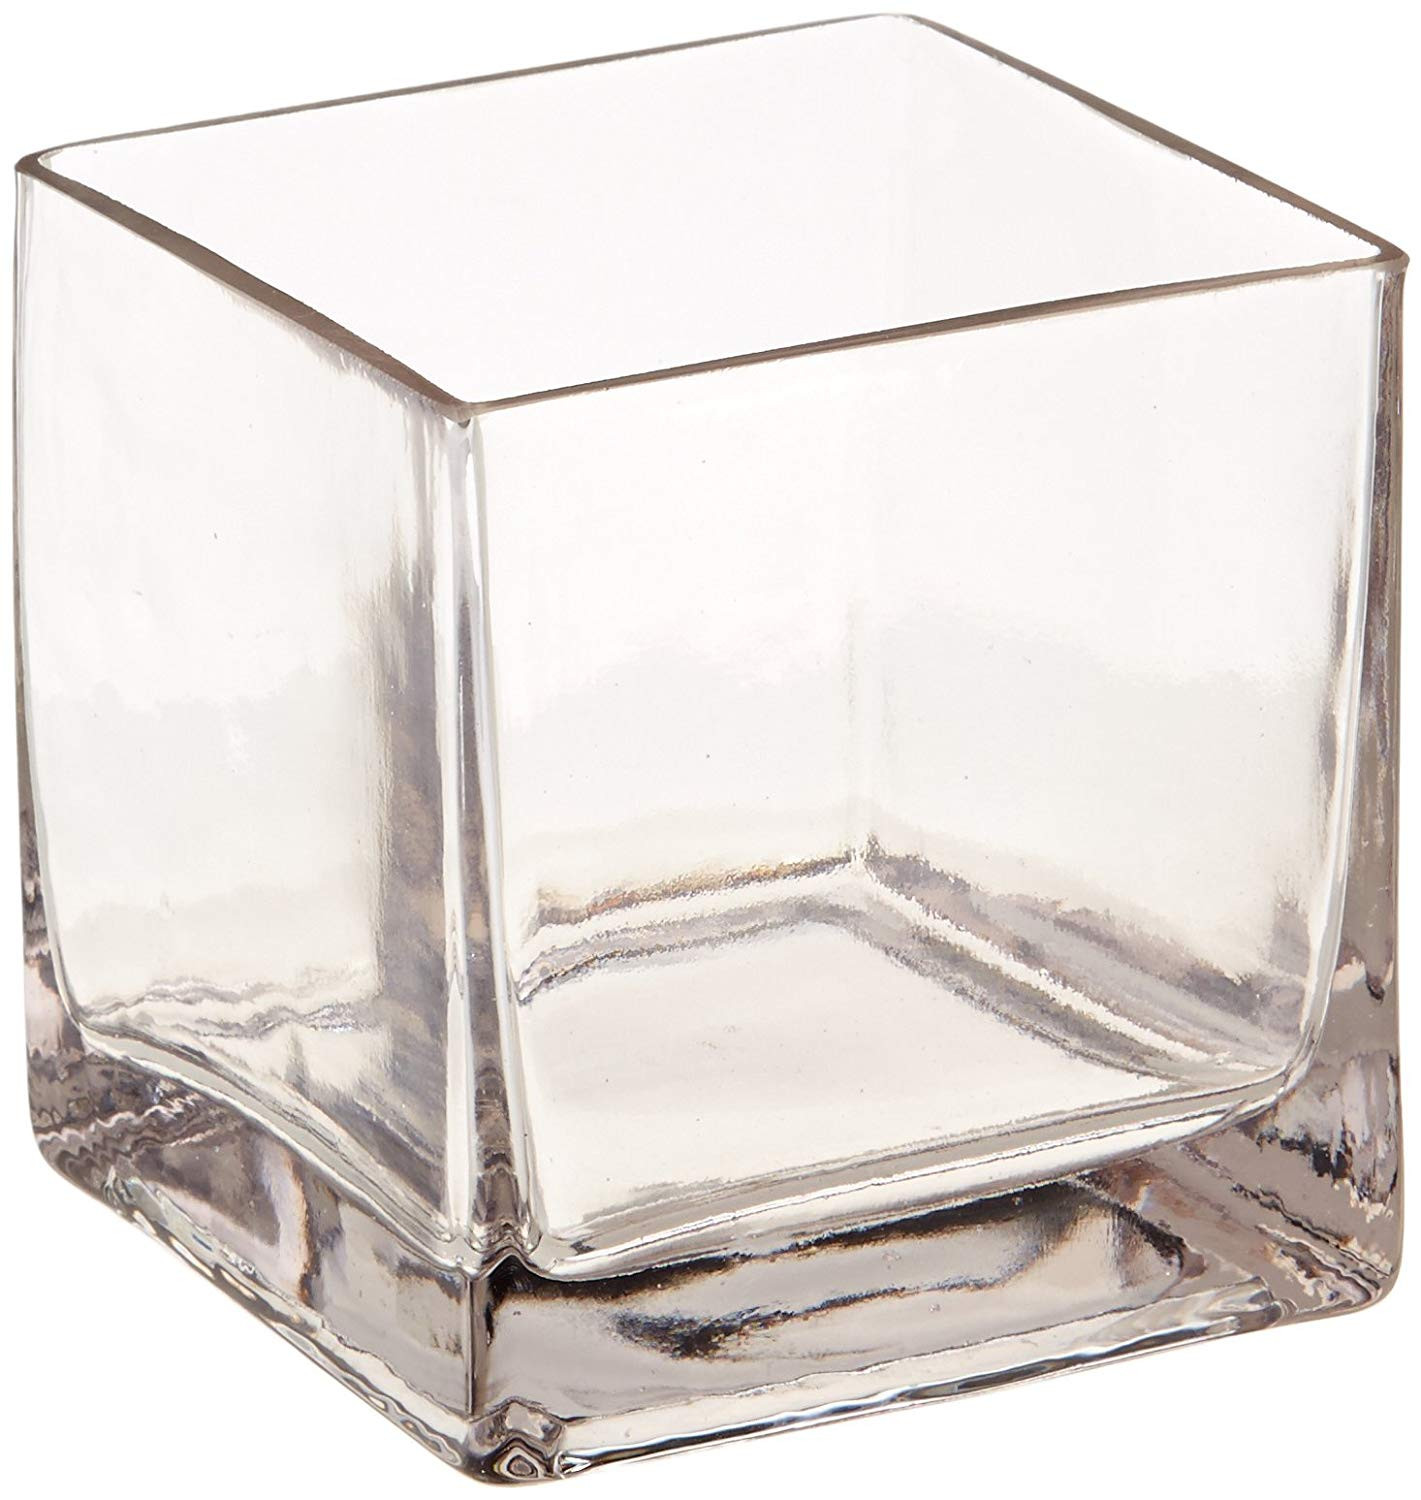 20 Fantastic Clear Acrylic Cylinder Vase 2024 free download clear acrylic cylinder vase of amazon com 12piece 4 square crystal clear glass vase home kitchen throughout 71 jezfmvnl sl1500